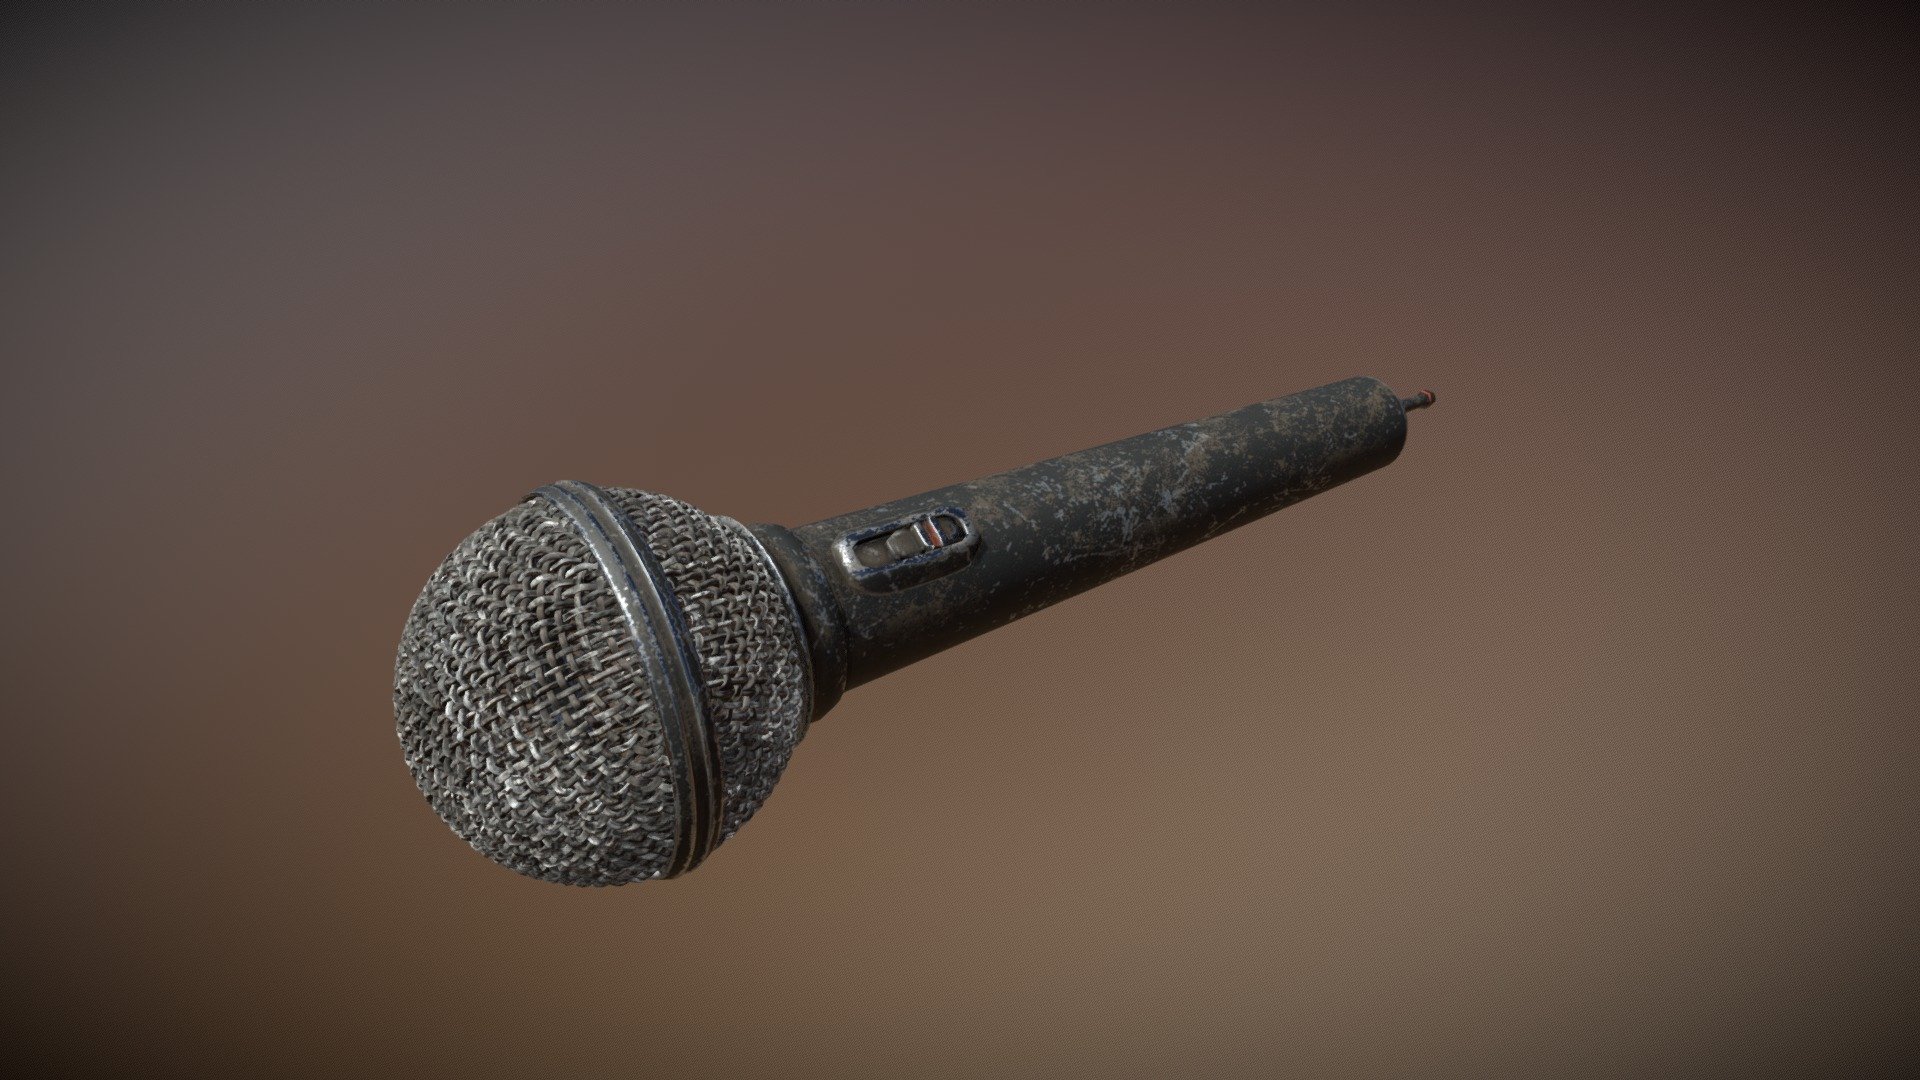 A dity old microphone is it a forgotten reminant of a long gone era or currently used by the crazed  MC of illegal fights in the desert: who's to know? 
More of a practice piece on mesh modelling than anything and not optimized for anything but maybe it will be of use to someone you never know! - Battle MC Microphone - 3D model by william.dahm 3d model